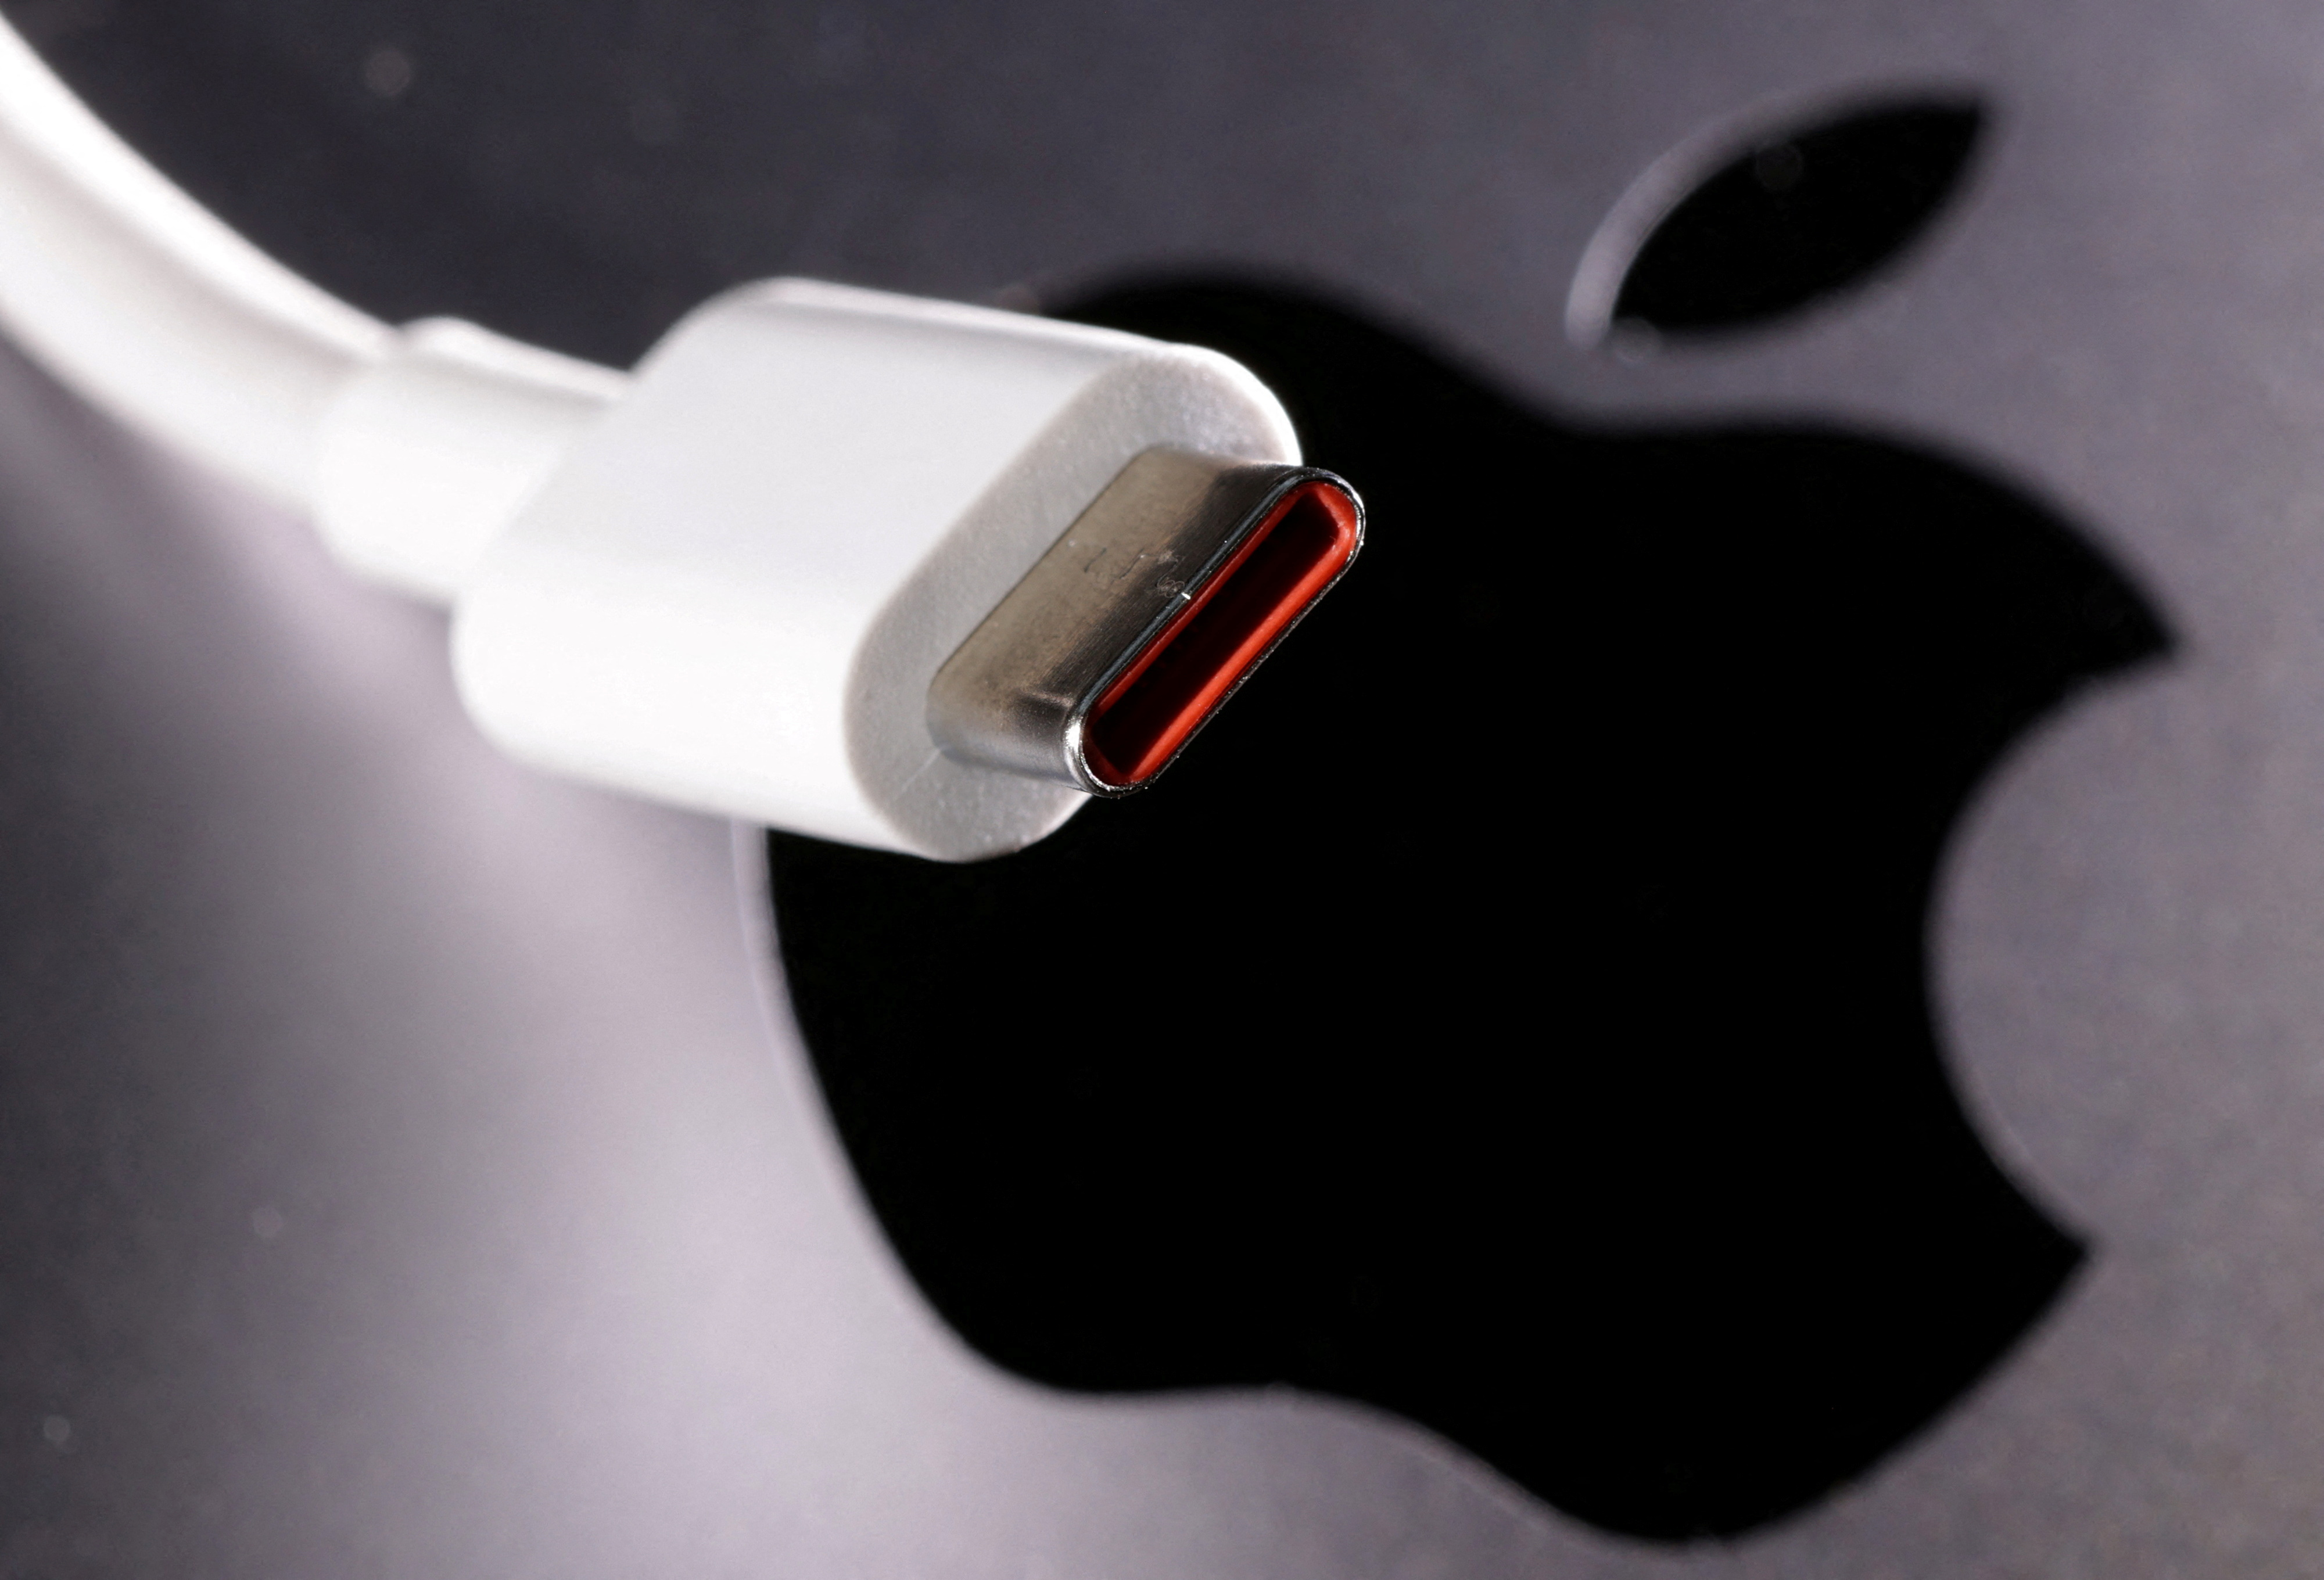 Illustration shows USB-C cable and Apple logo